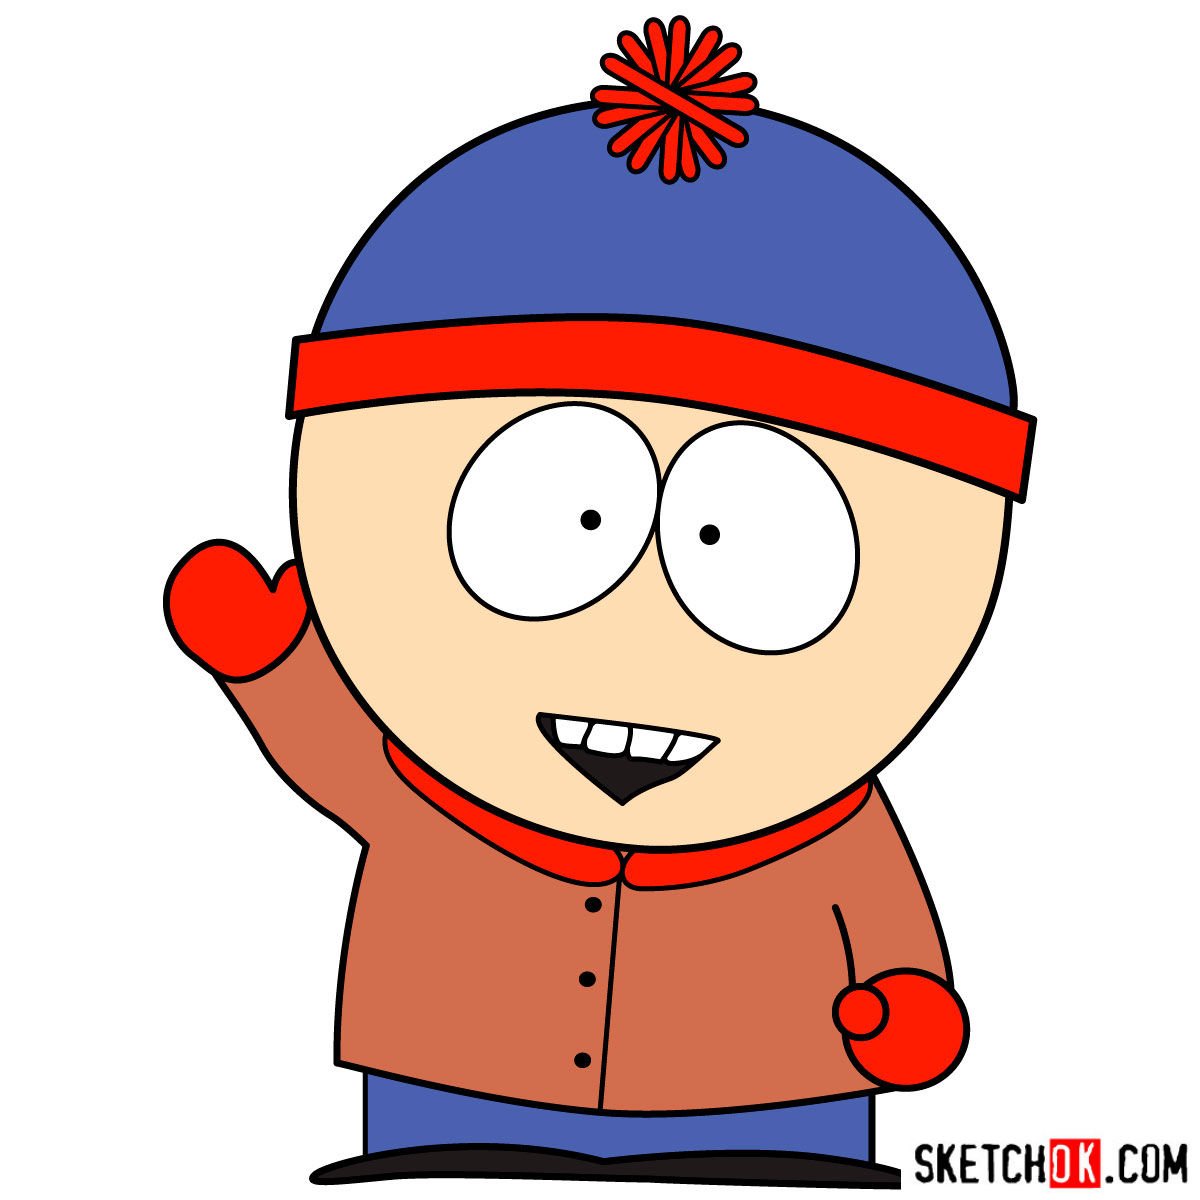 How to draw Stan Marsh from South Park Sketchok